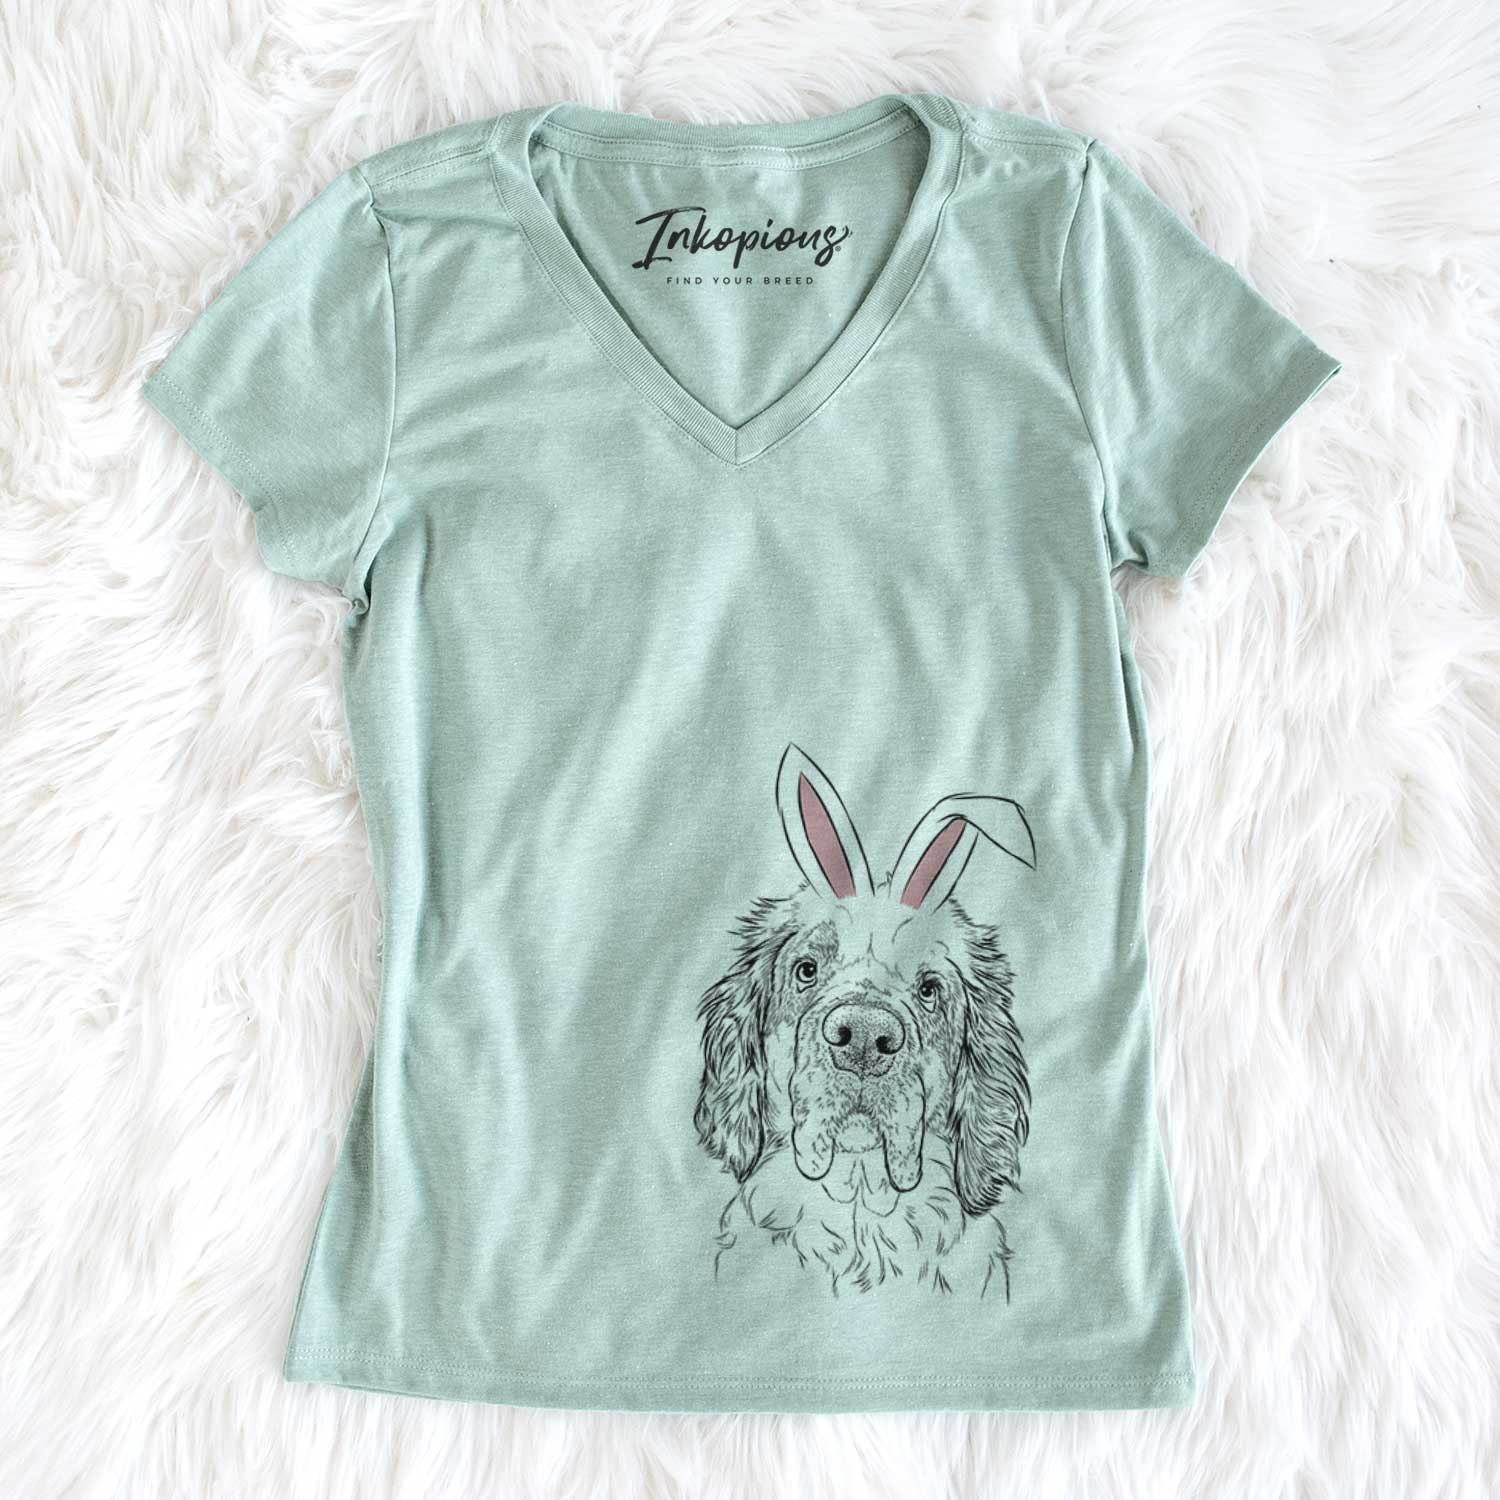 Easter Sully the Clumber Spaniel - Women's Perfect V-neck Shirt